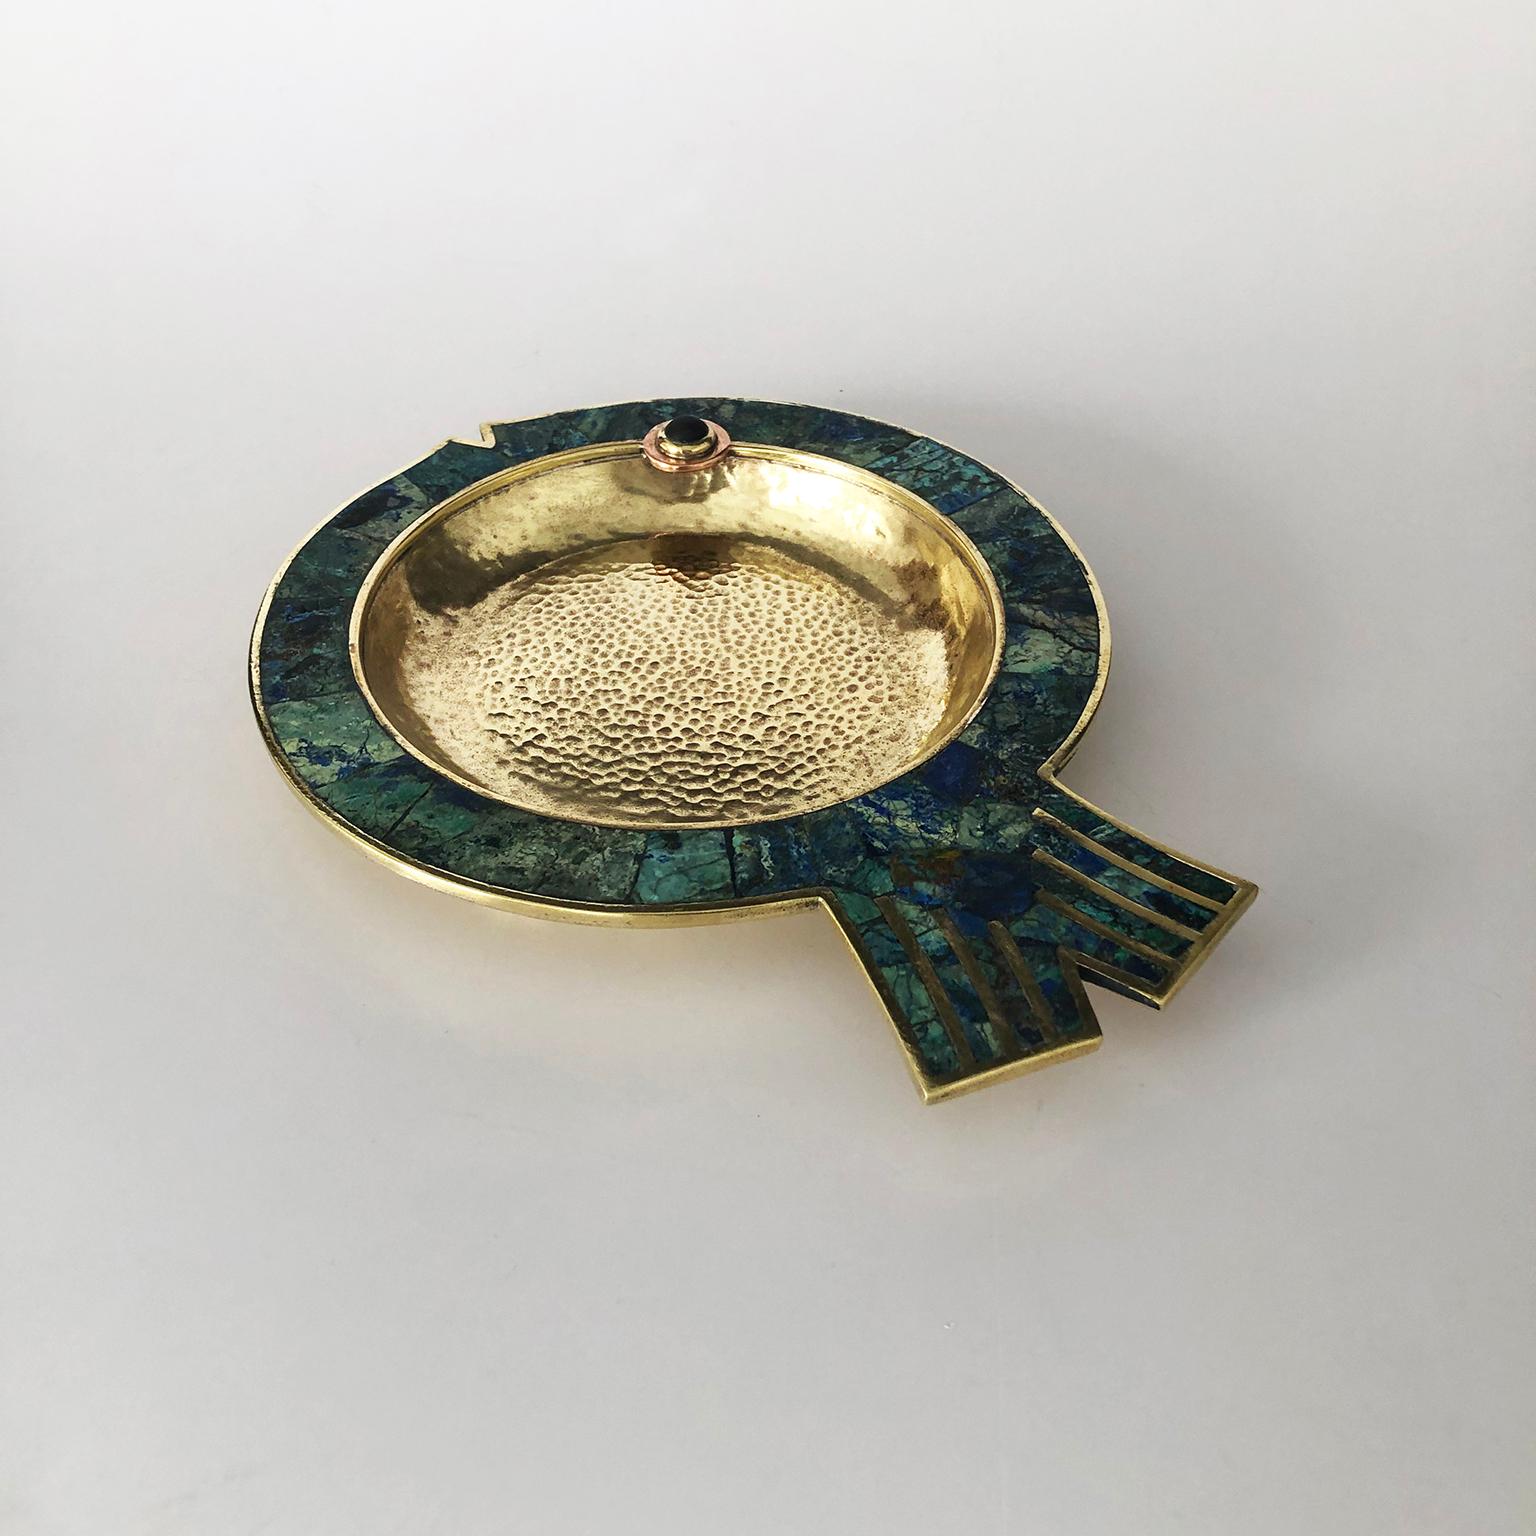 We offer this beautifully crafted Los Castillo turquoise dish in fish form, includes Los castillo signature, circa 1950.